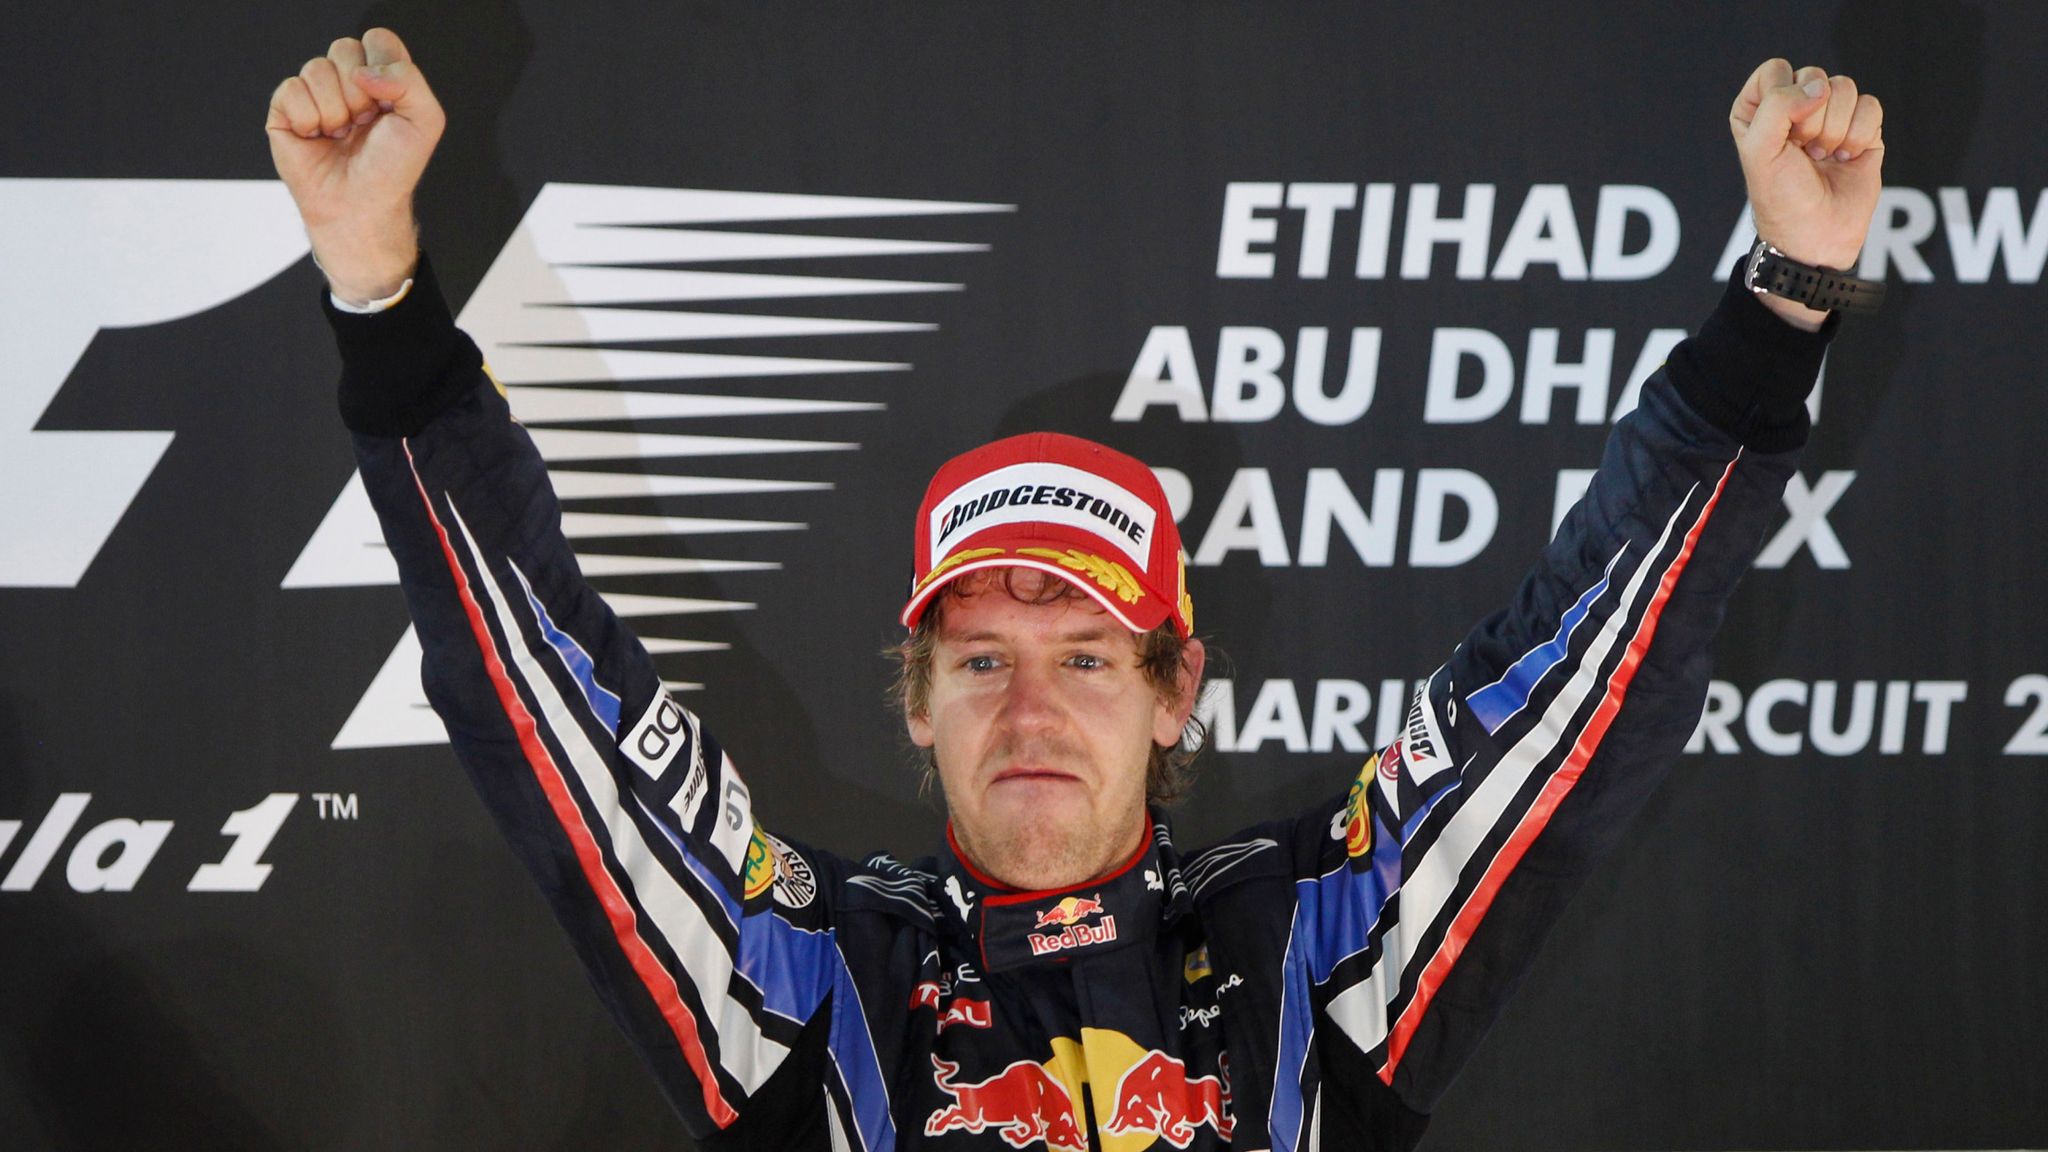 When Vettel crashed and triumphed in F1's last great title decider